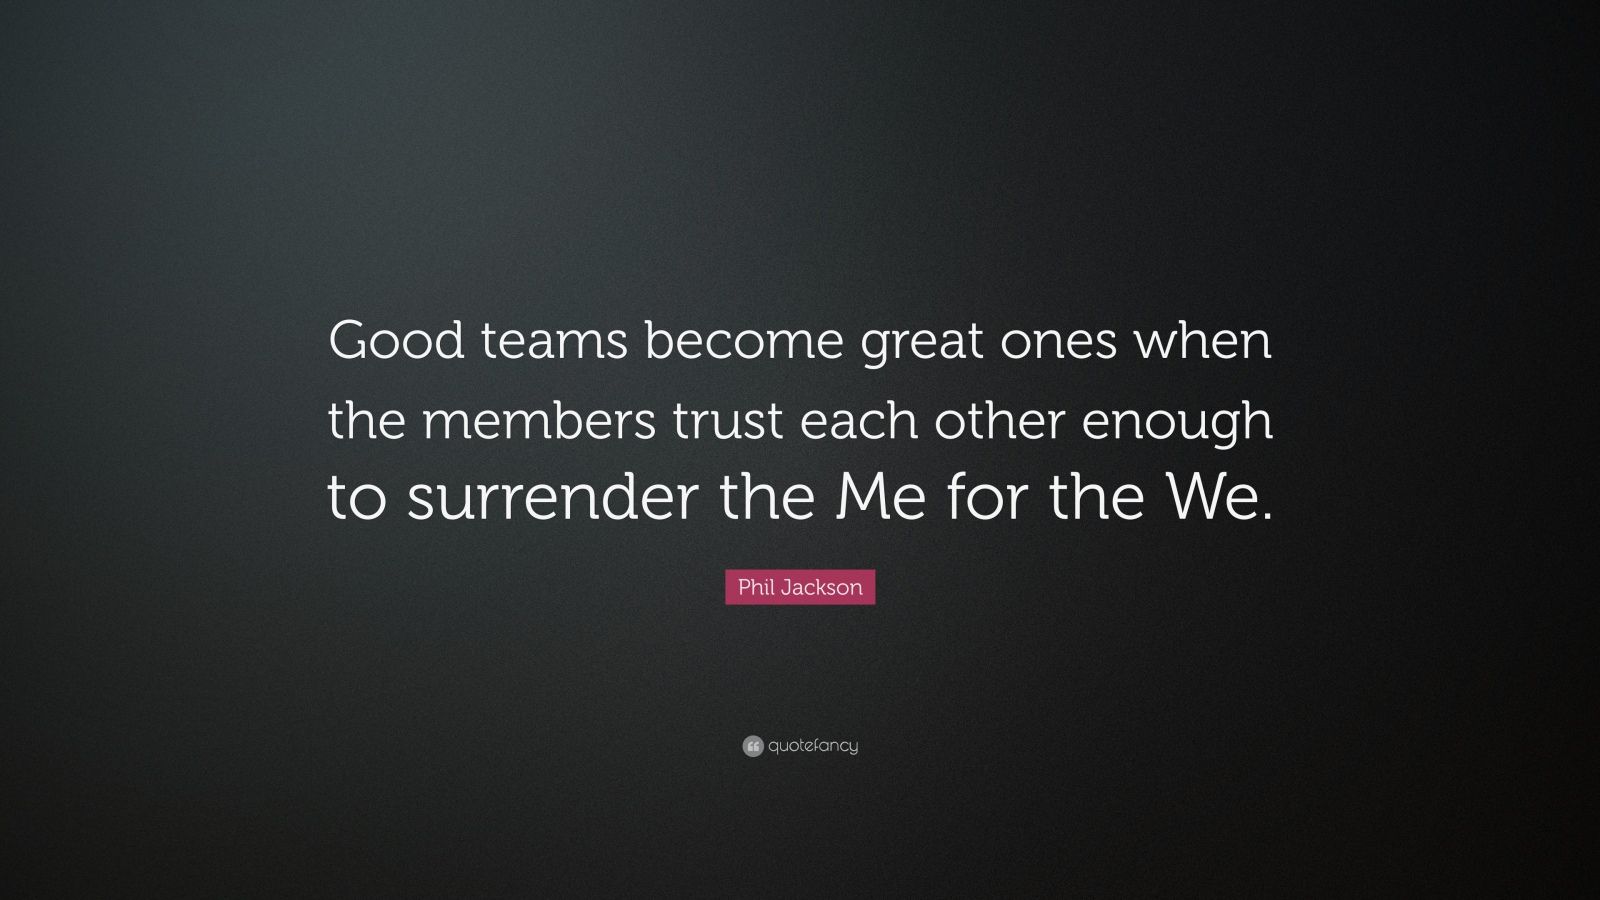 Phil Jackson Quote: “Good teams become great ones when the members